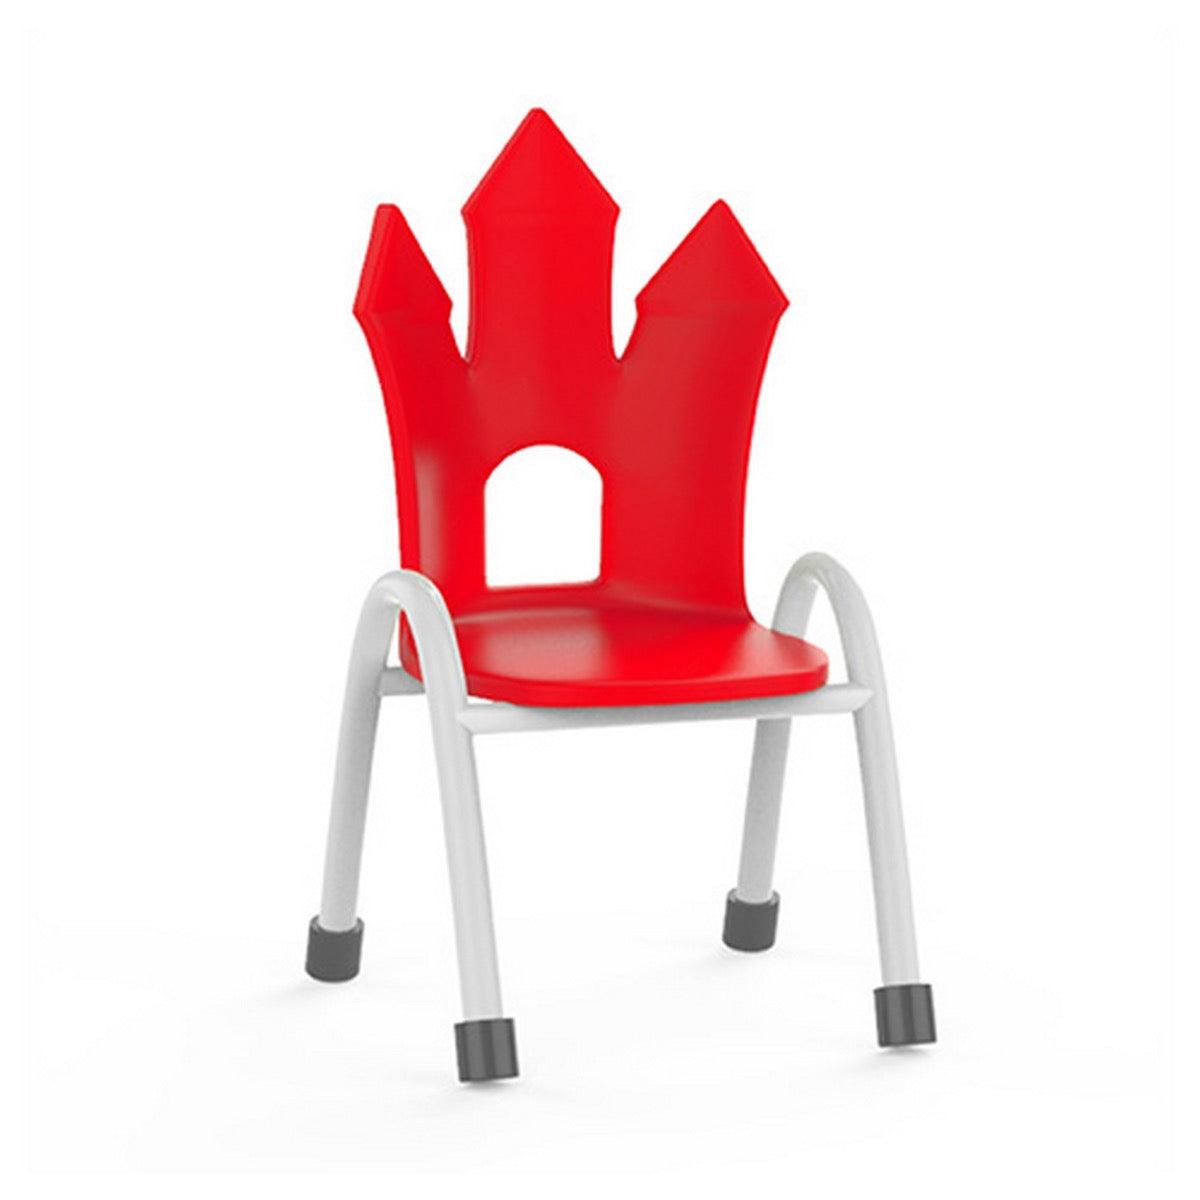 Ok Play Castle Chair, Study Chair, Sturdy And Durable Chair, , Plastic Chair, Perfect For Home, Creches And School, Red, 5 to 10 Years, Height 10 Inches